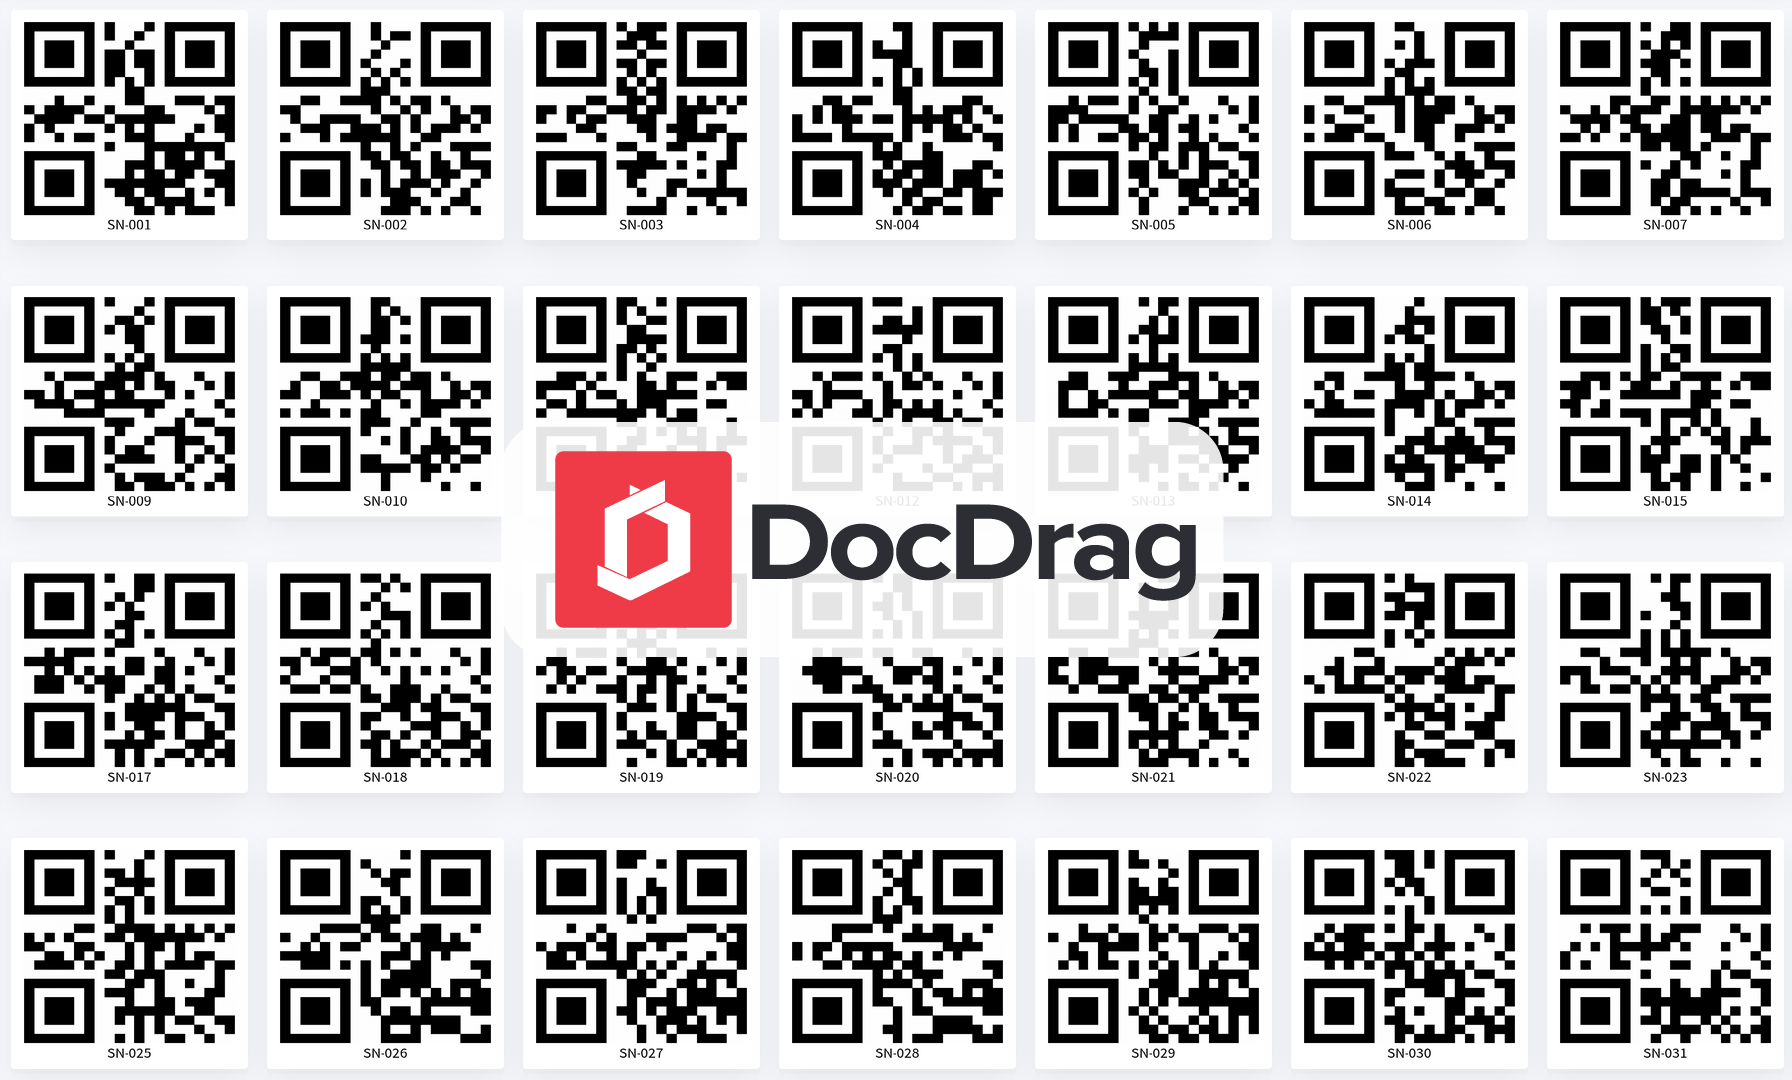 How to generate bulk QR codes in a minute?